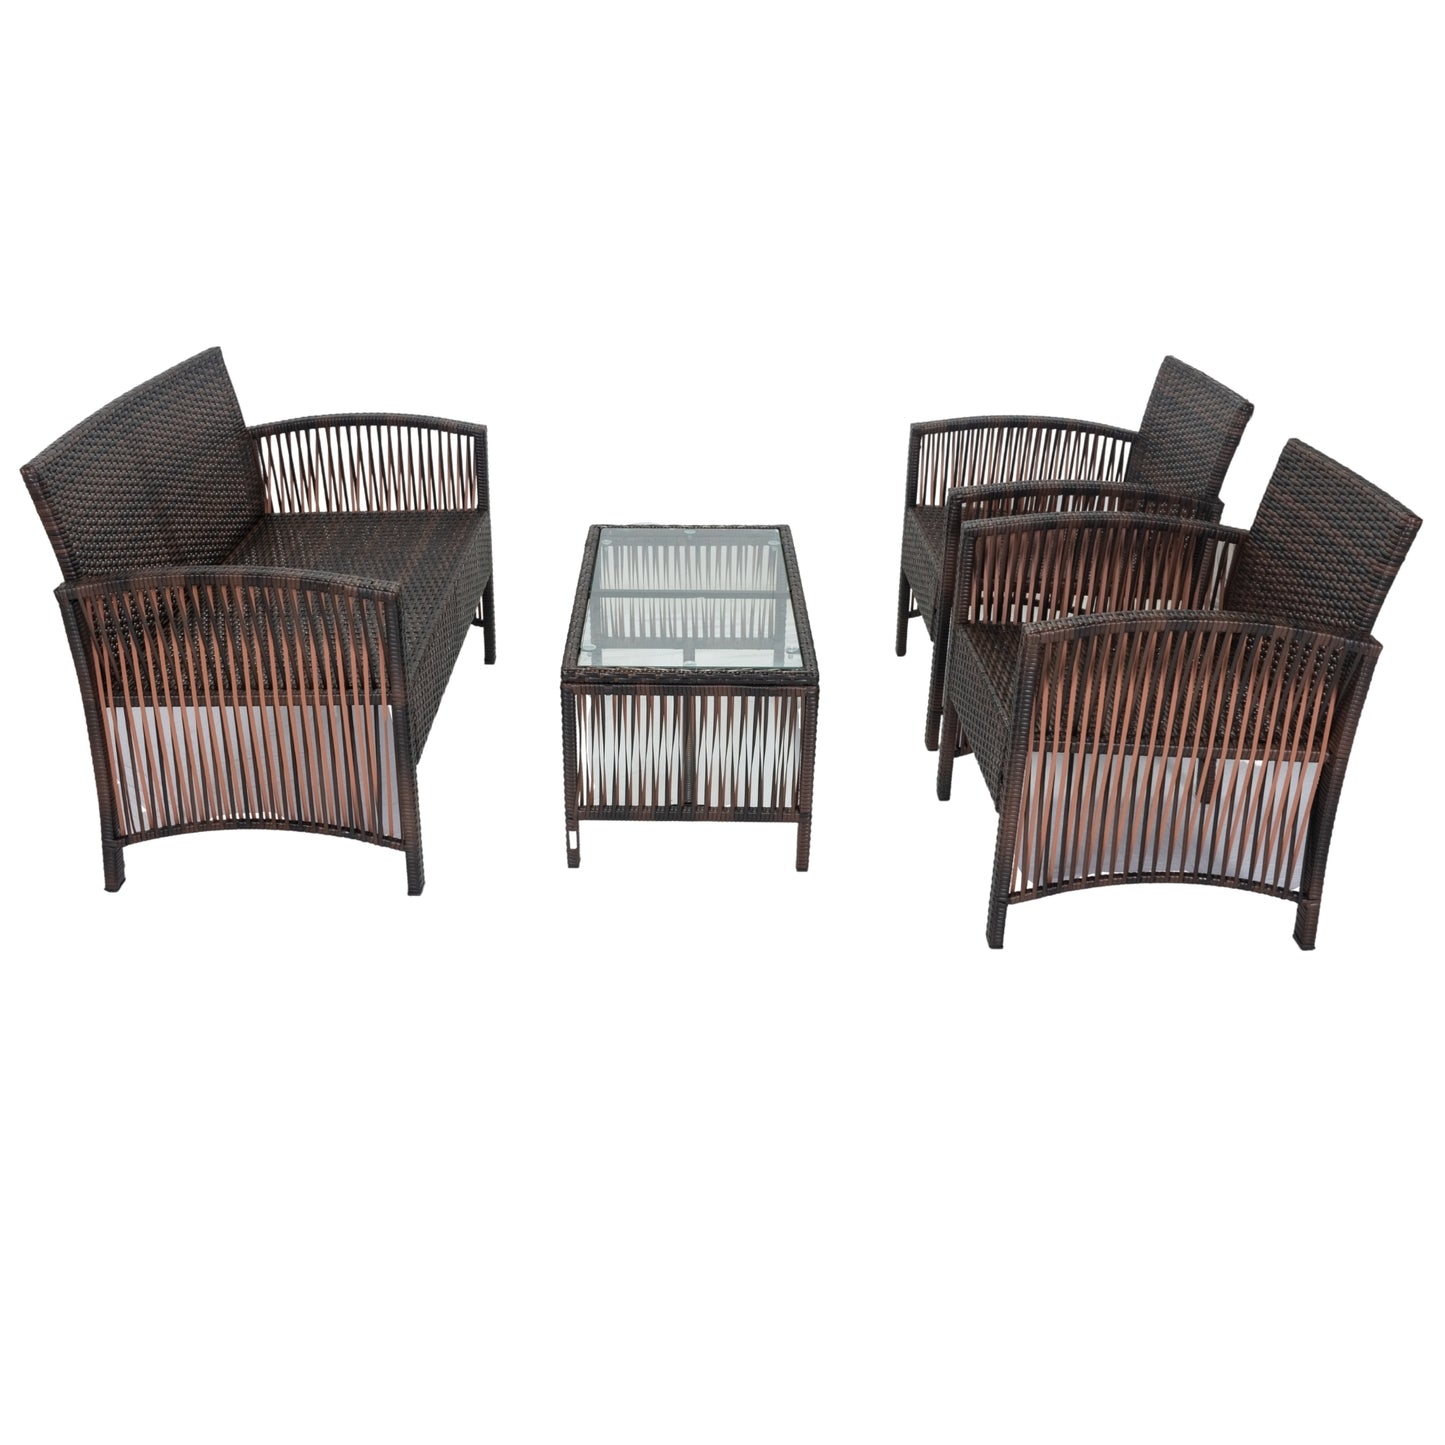 4 PCs Outdoor Patio Furniture Sofa Conversation Sets PE Rattan Wicker Sofa Chair Set Cushioned Seat with Glass Tabletop Coffee Table with Soft Cushions & Tempered Glass Coffee Table